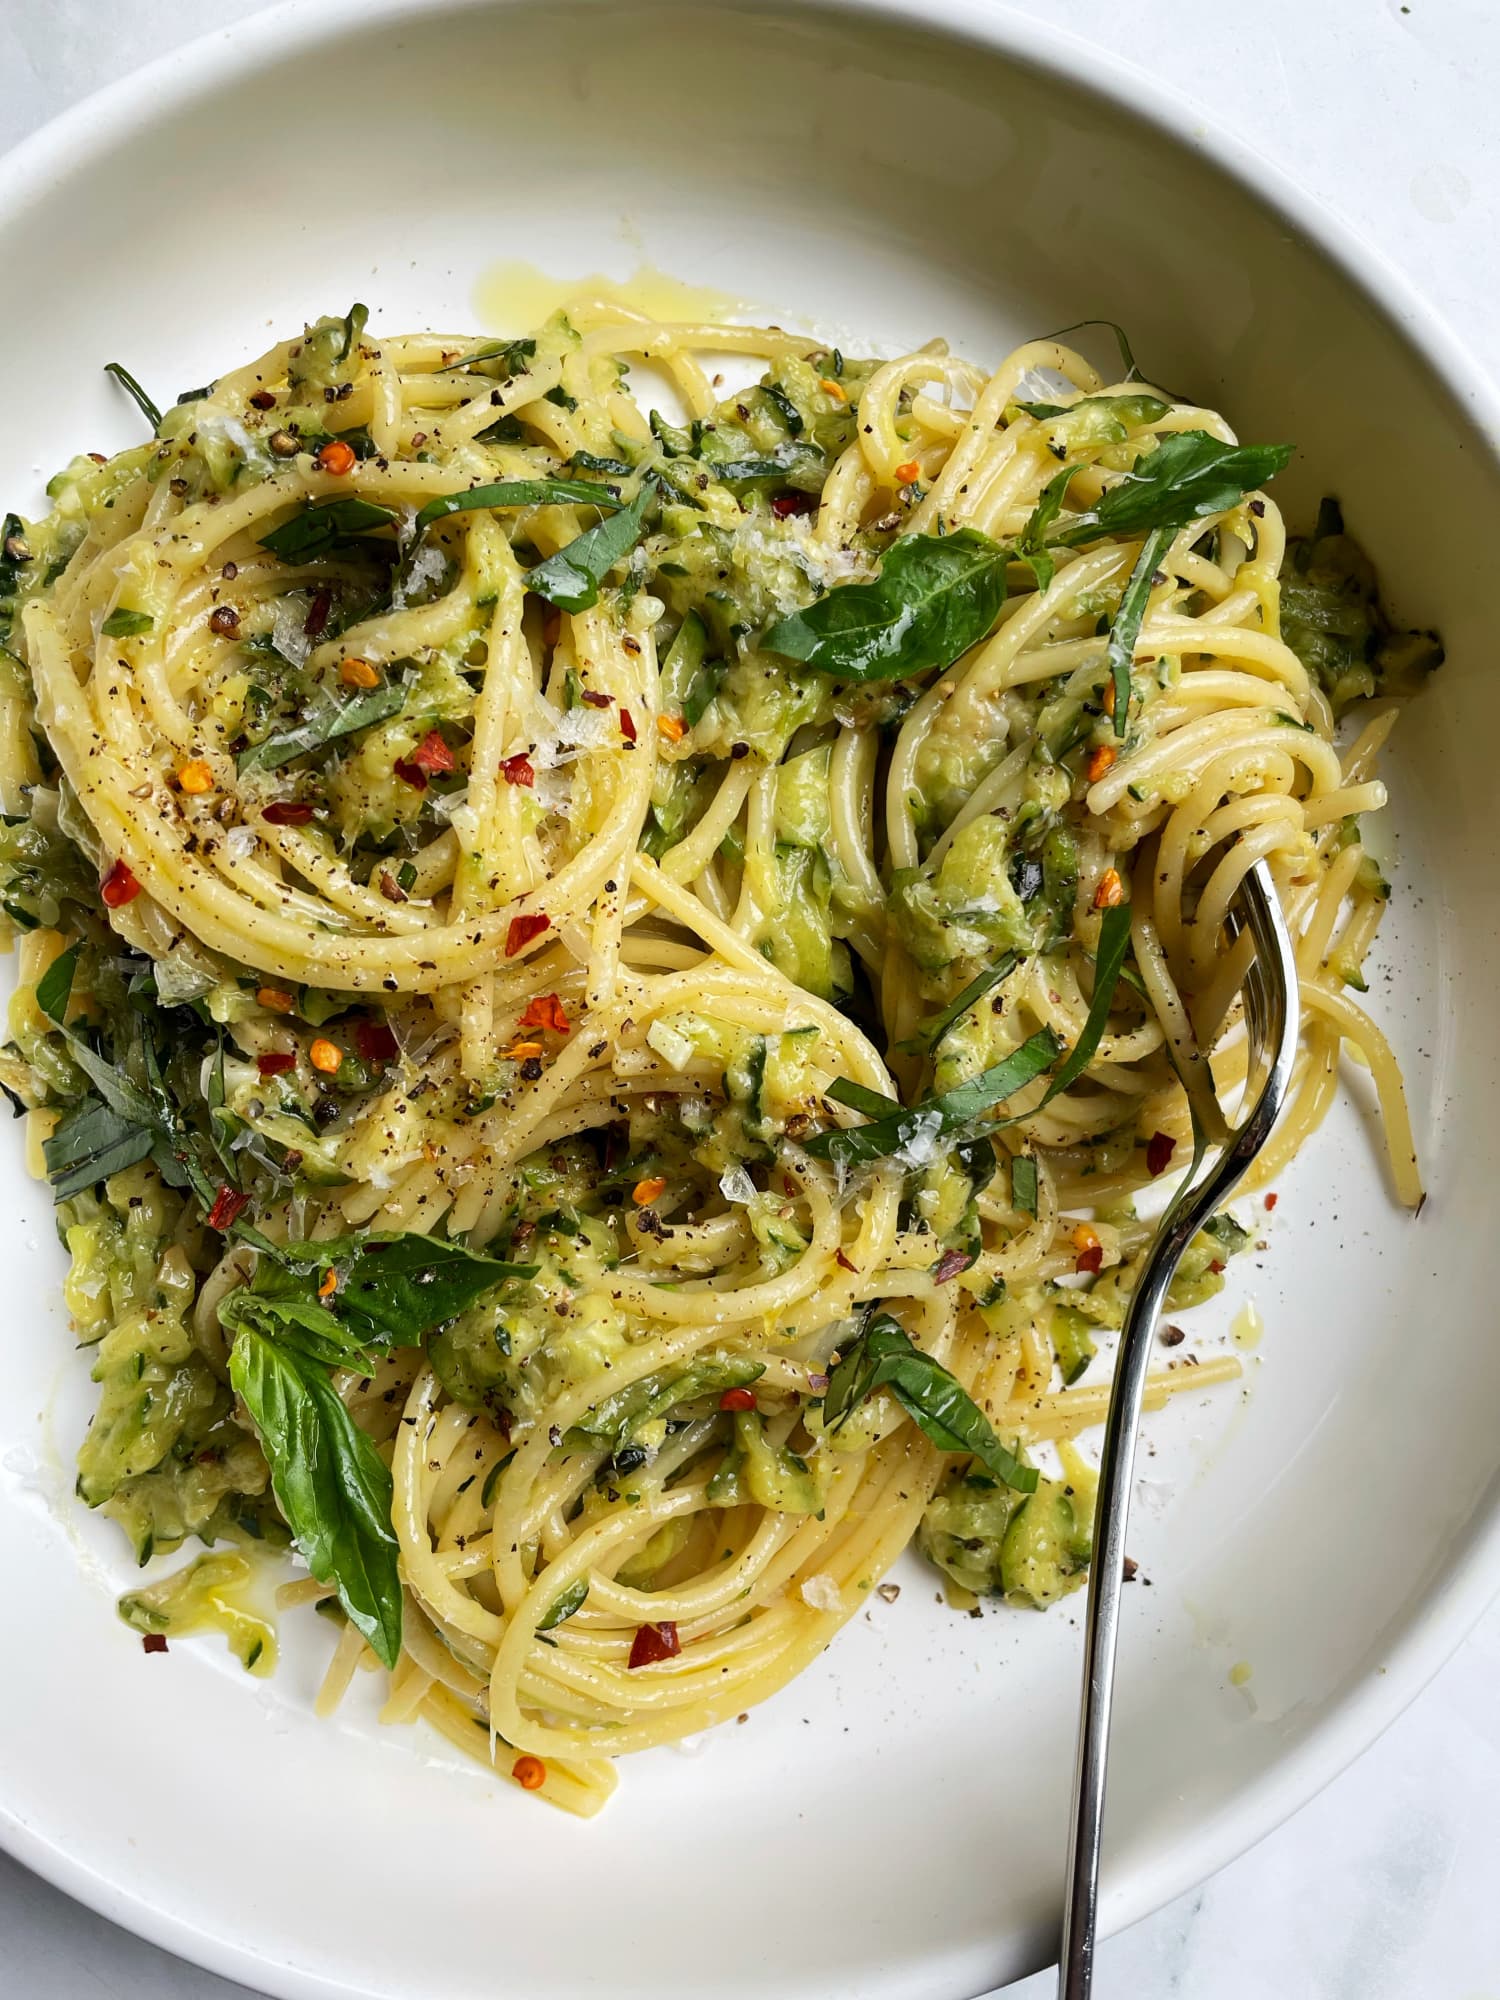 Smitten Kitchen’s Zucchini Butter Pasta Is the Dish of the Summer